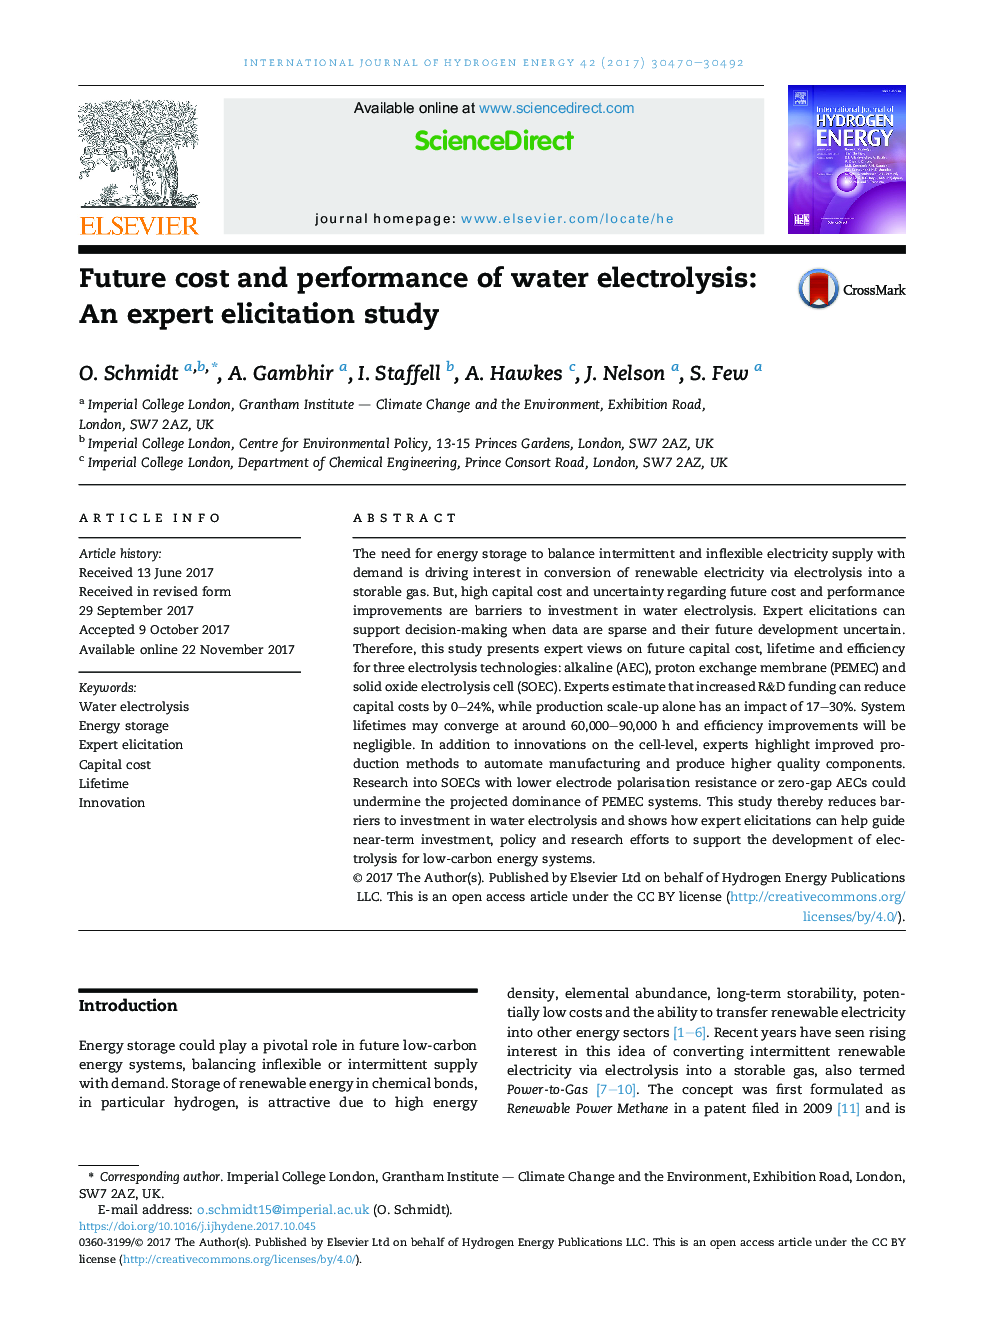 Future cost and performance of water electrolysis: An expert elicitation study